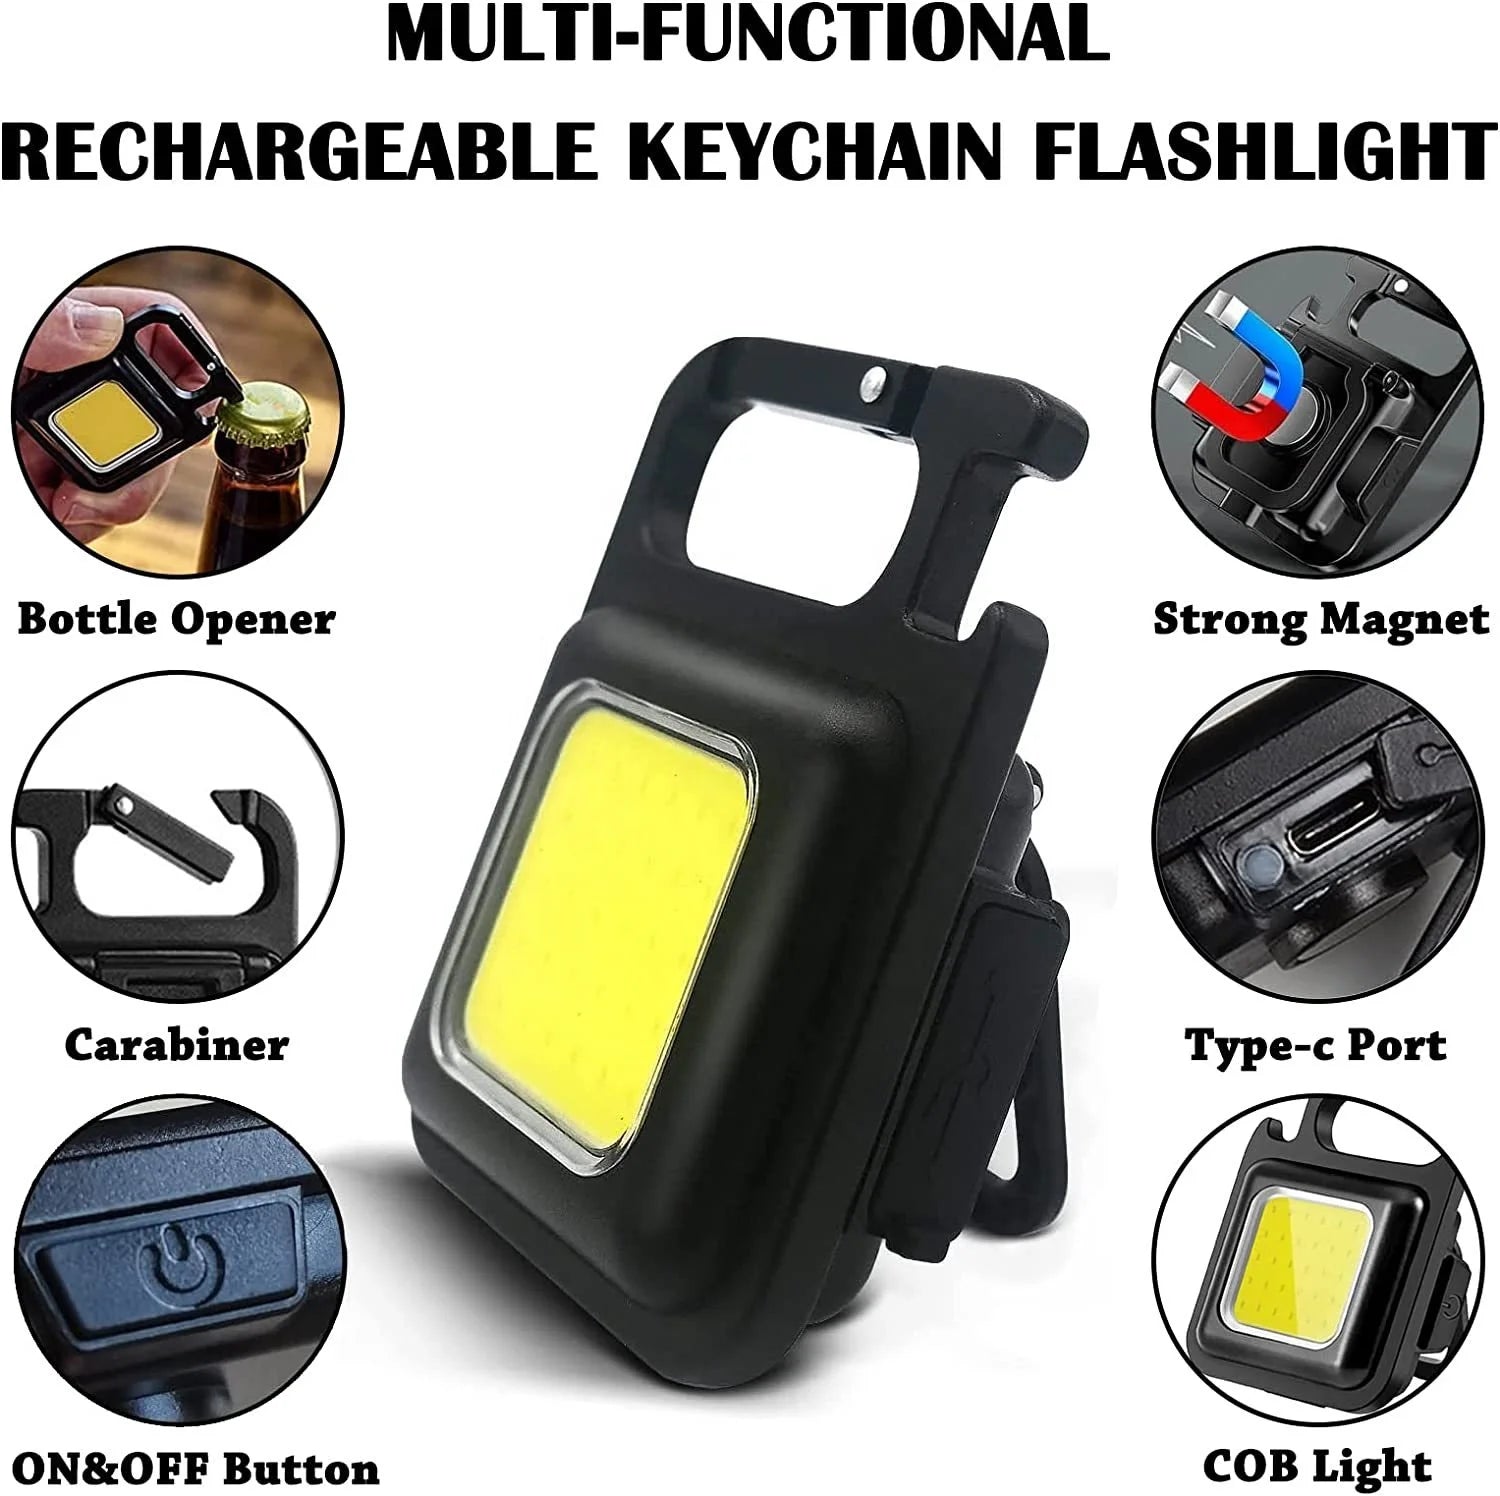 Mini Portable magnetic rechargeable cob led work light  keychain LED flashlight keychain flashlight  torch With Bottle Opener